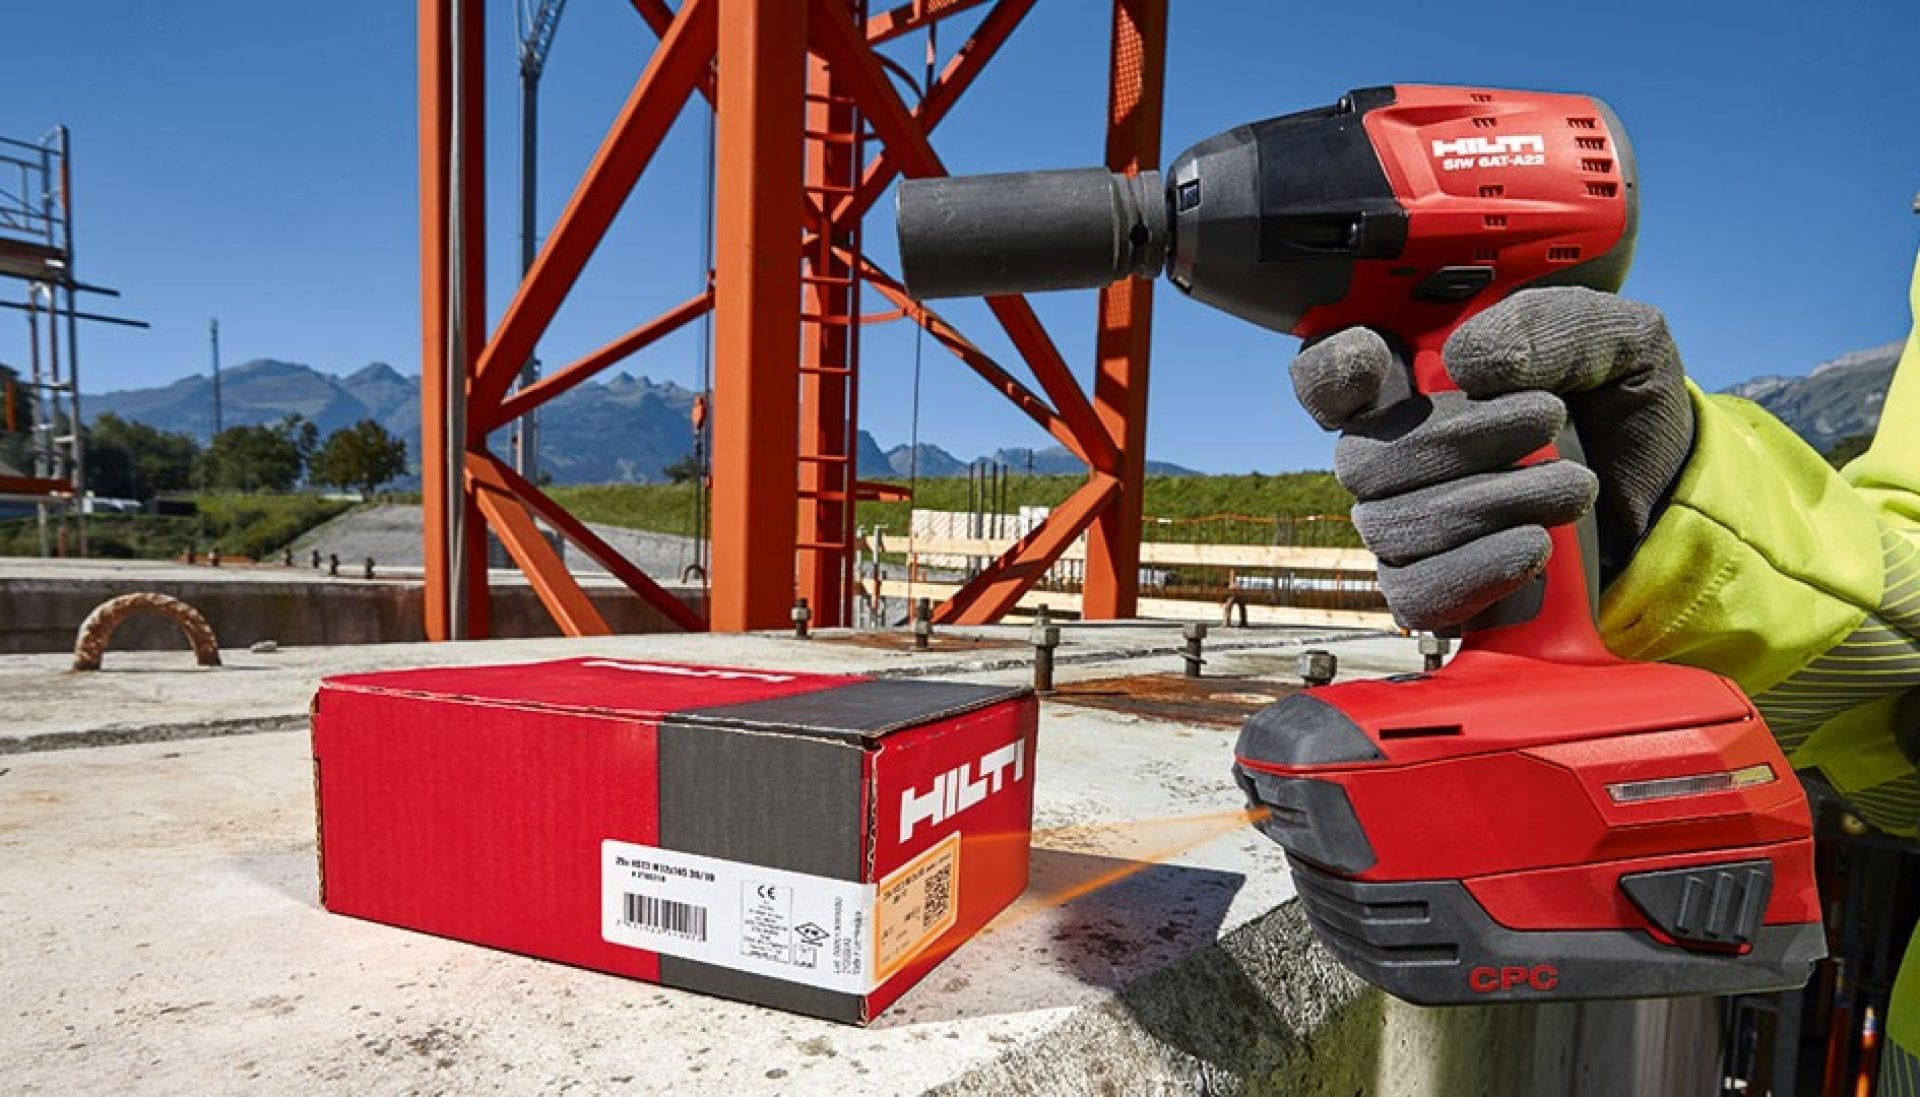 Introducing the SIW 6AT-A22 impact wrench